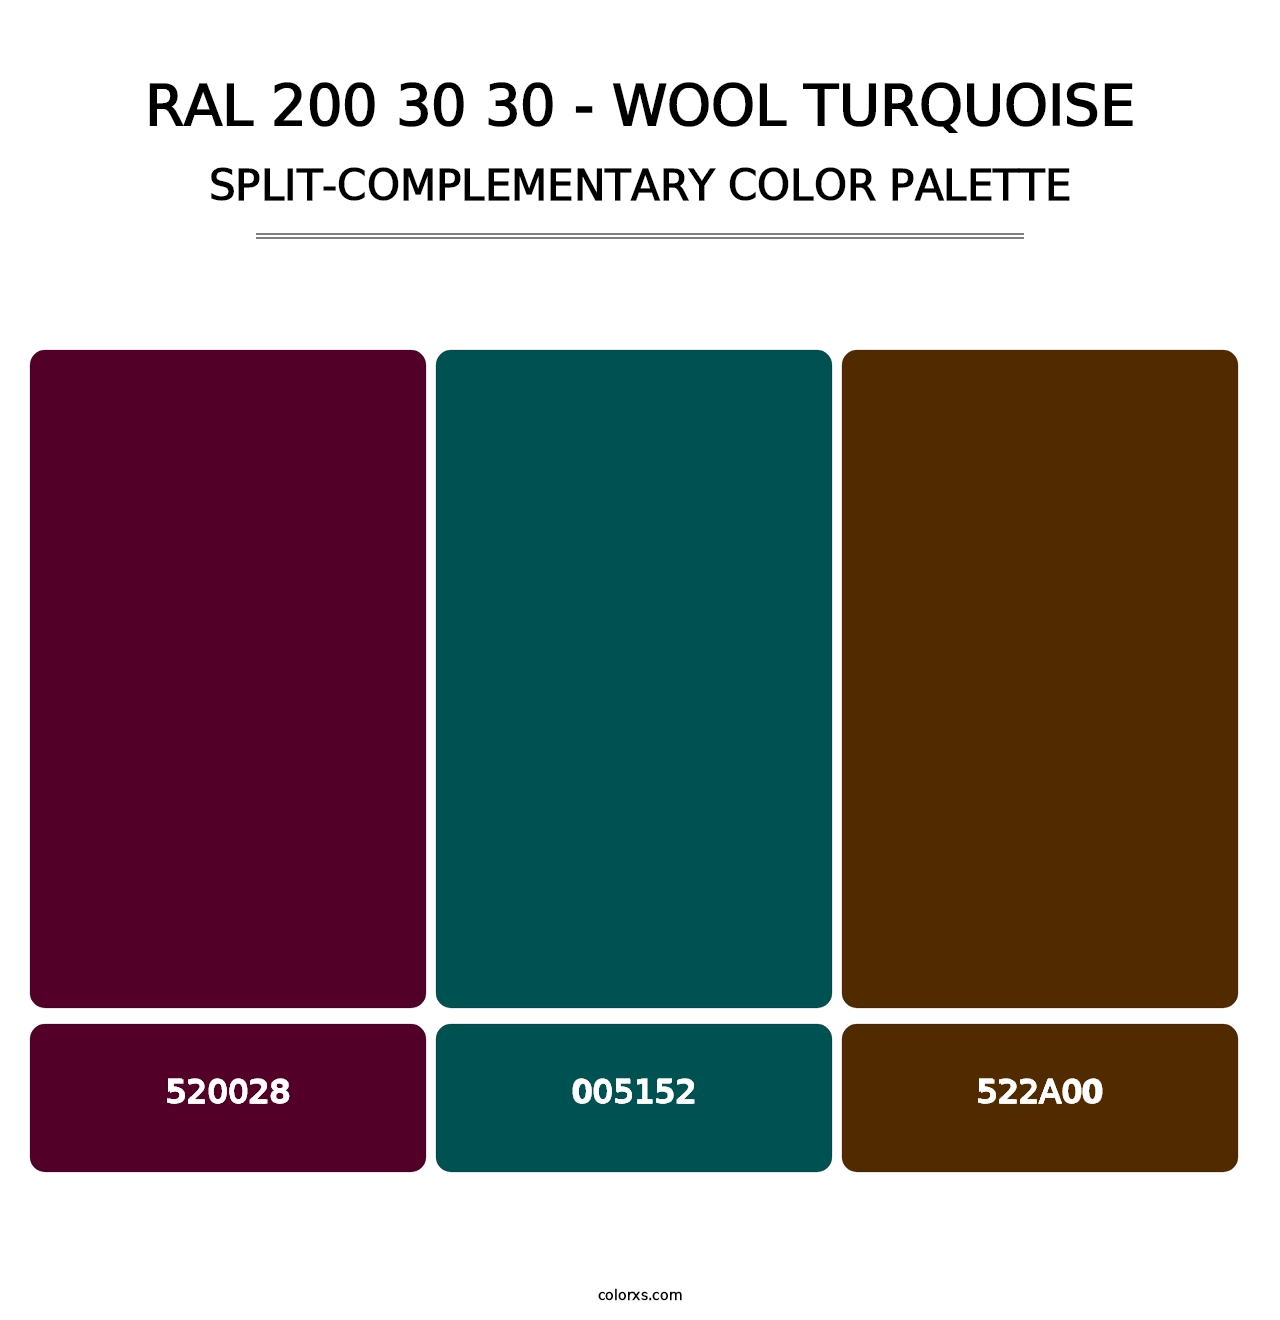 RAL 200 30 30 - Wool Turquoise - Split-Complementary Color Palette